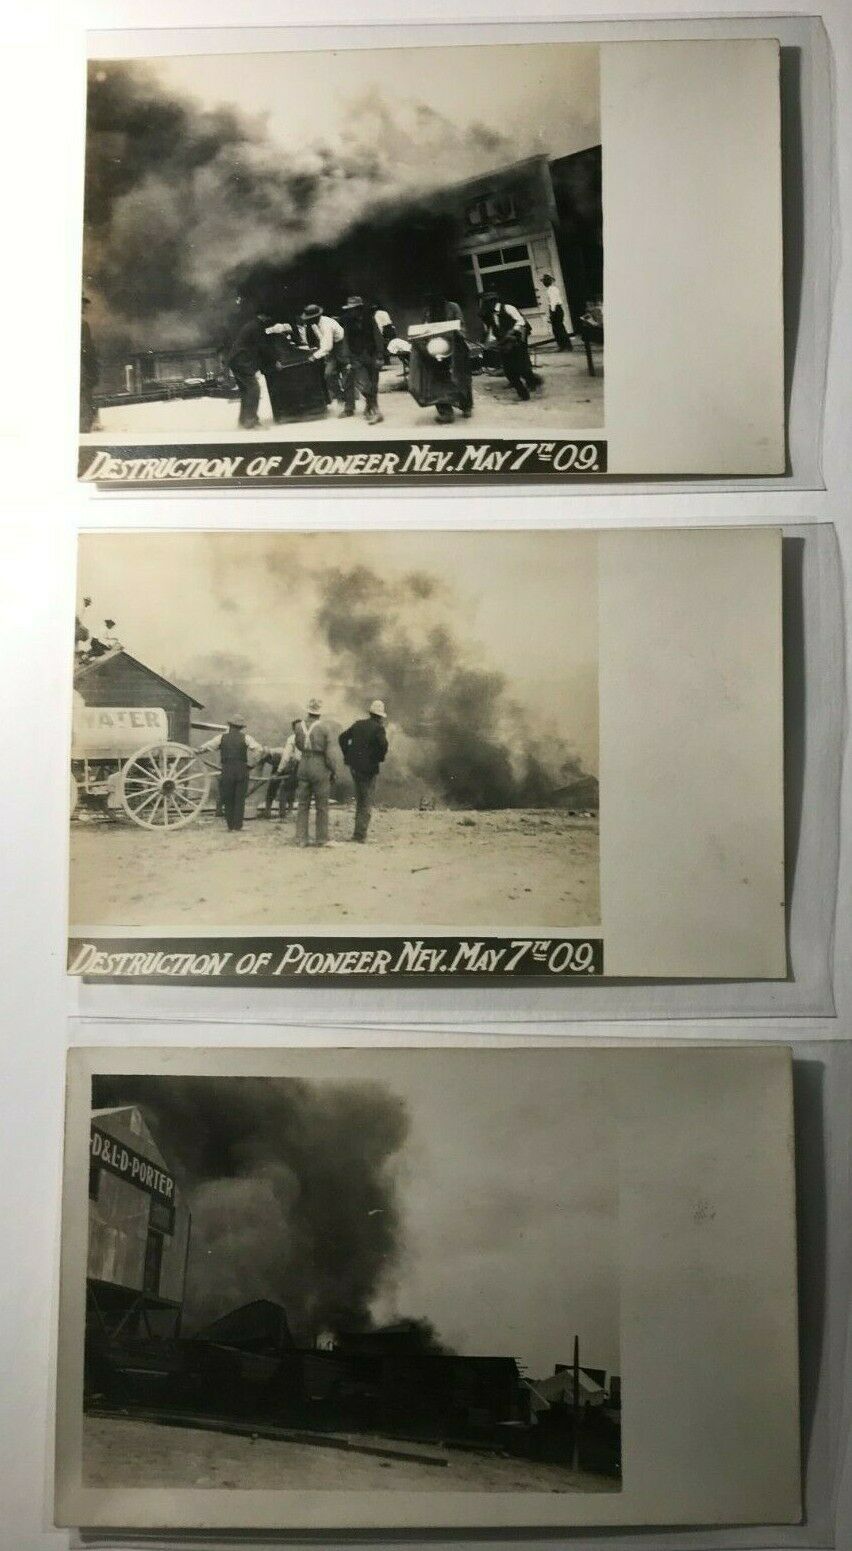 Destruction Of Pioneer, Water Wagon Fire, Nevada Nv May 1909 - 3 Real Photos